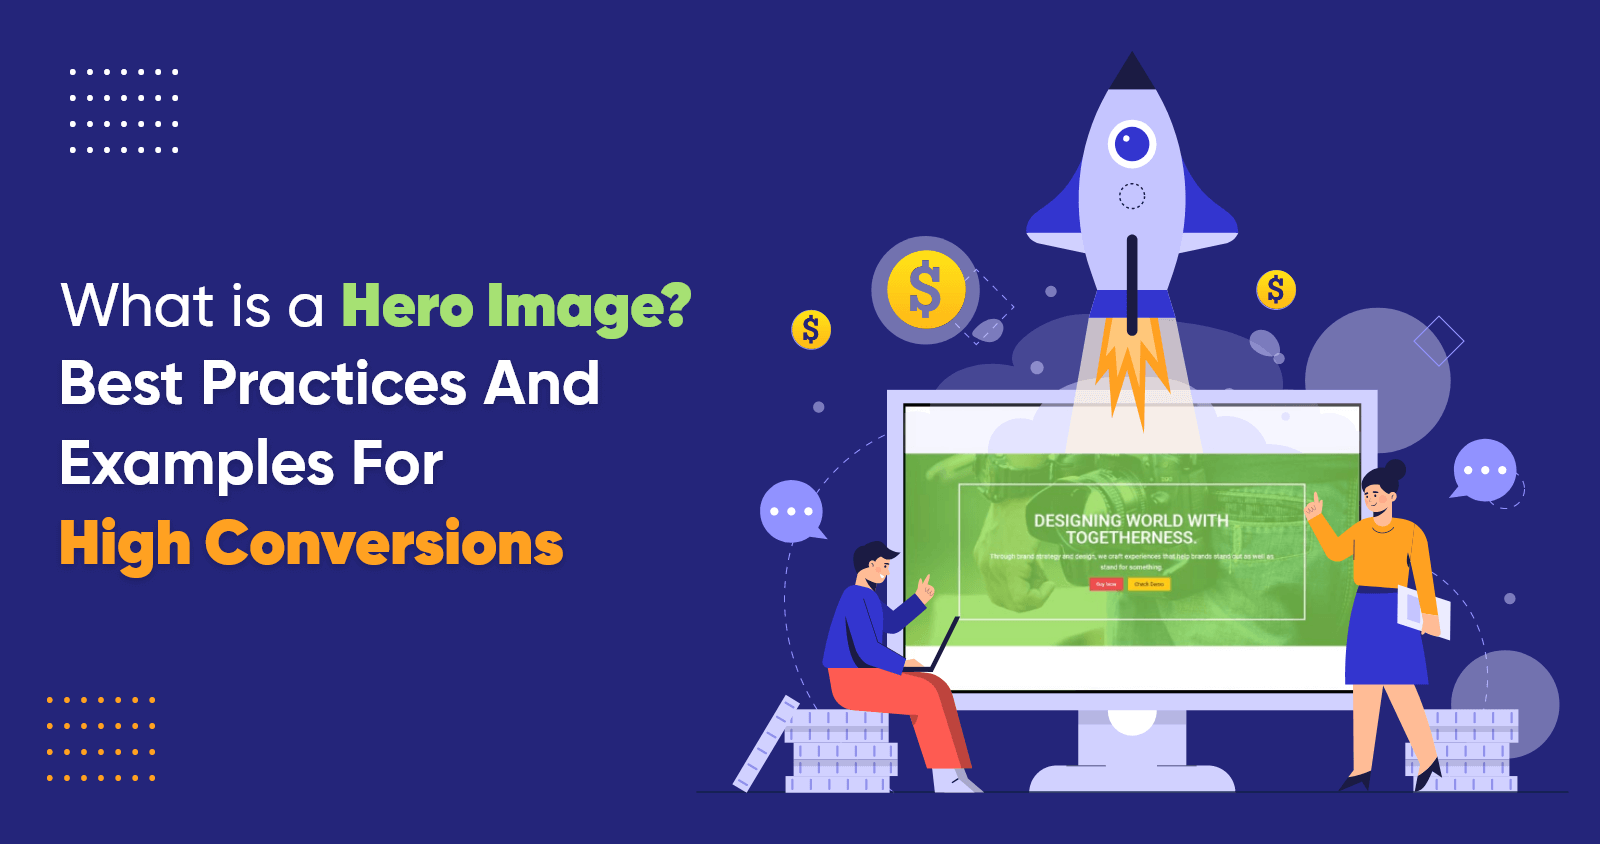 What is a Hero Image Best Practices And Examples For High Conversions